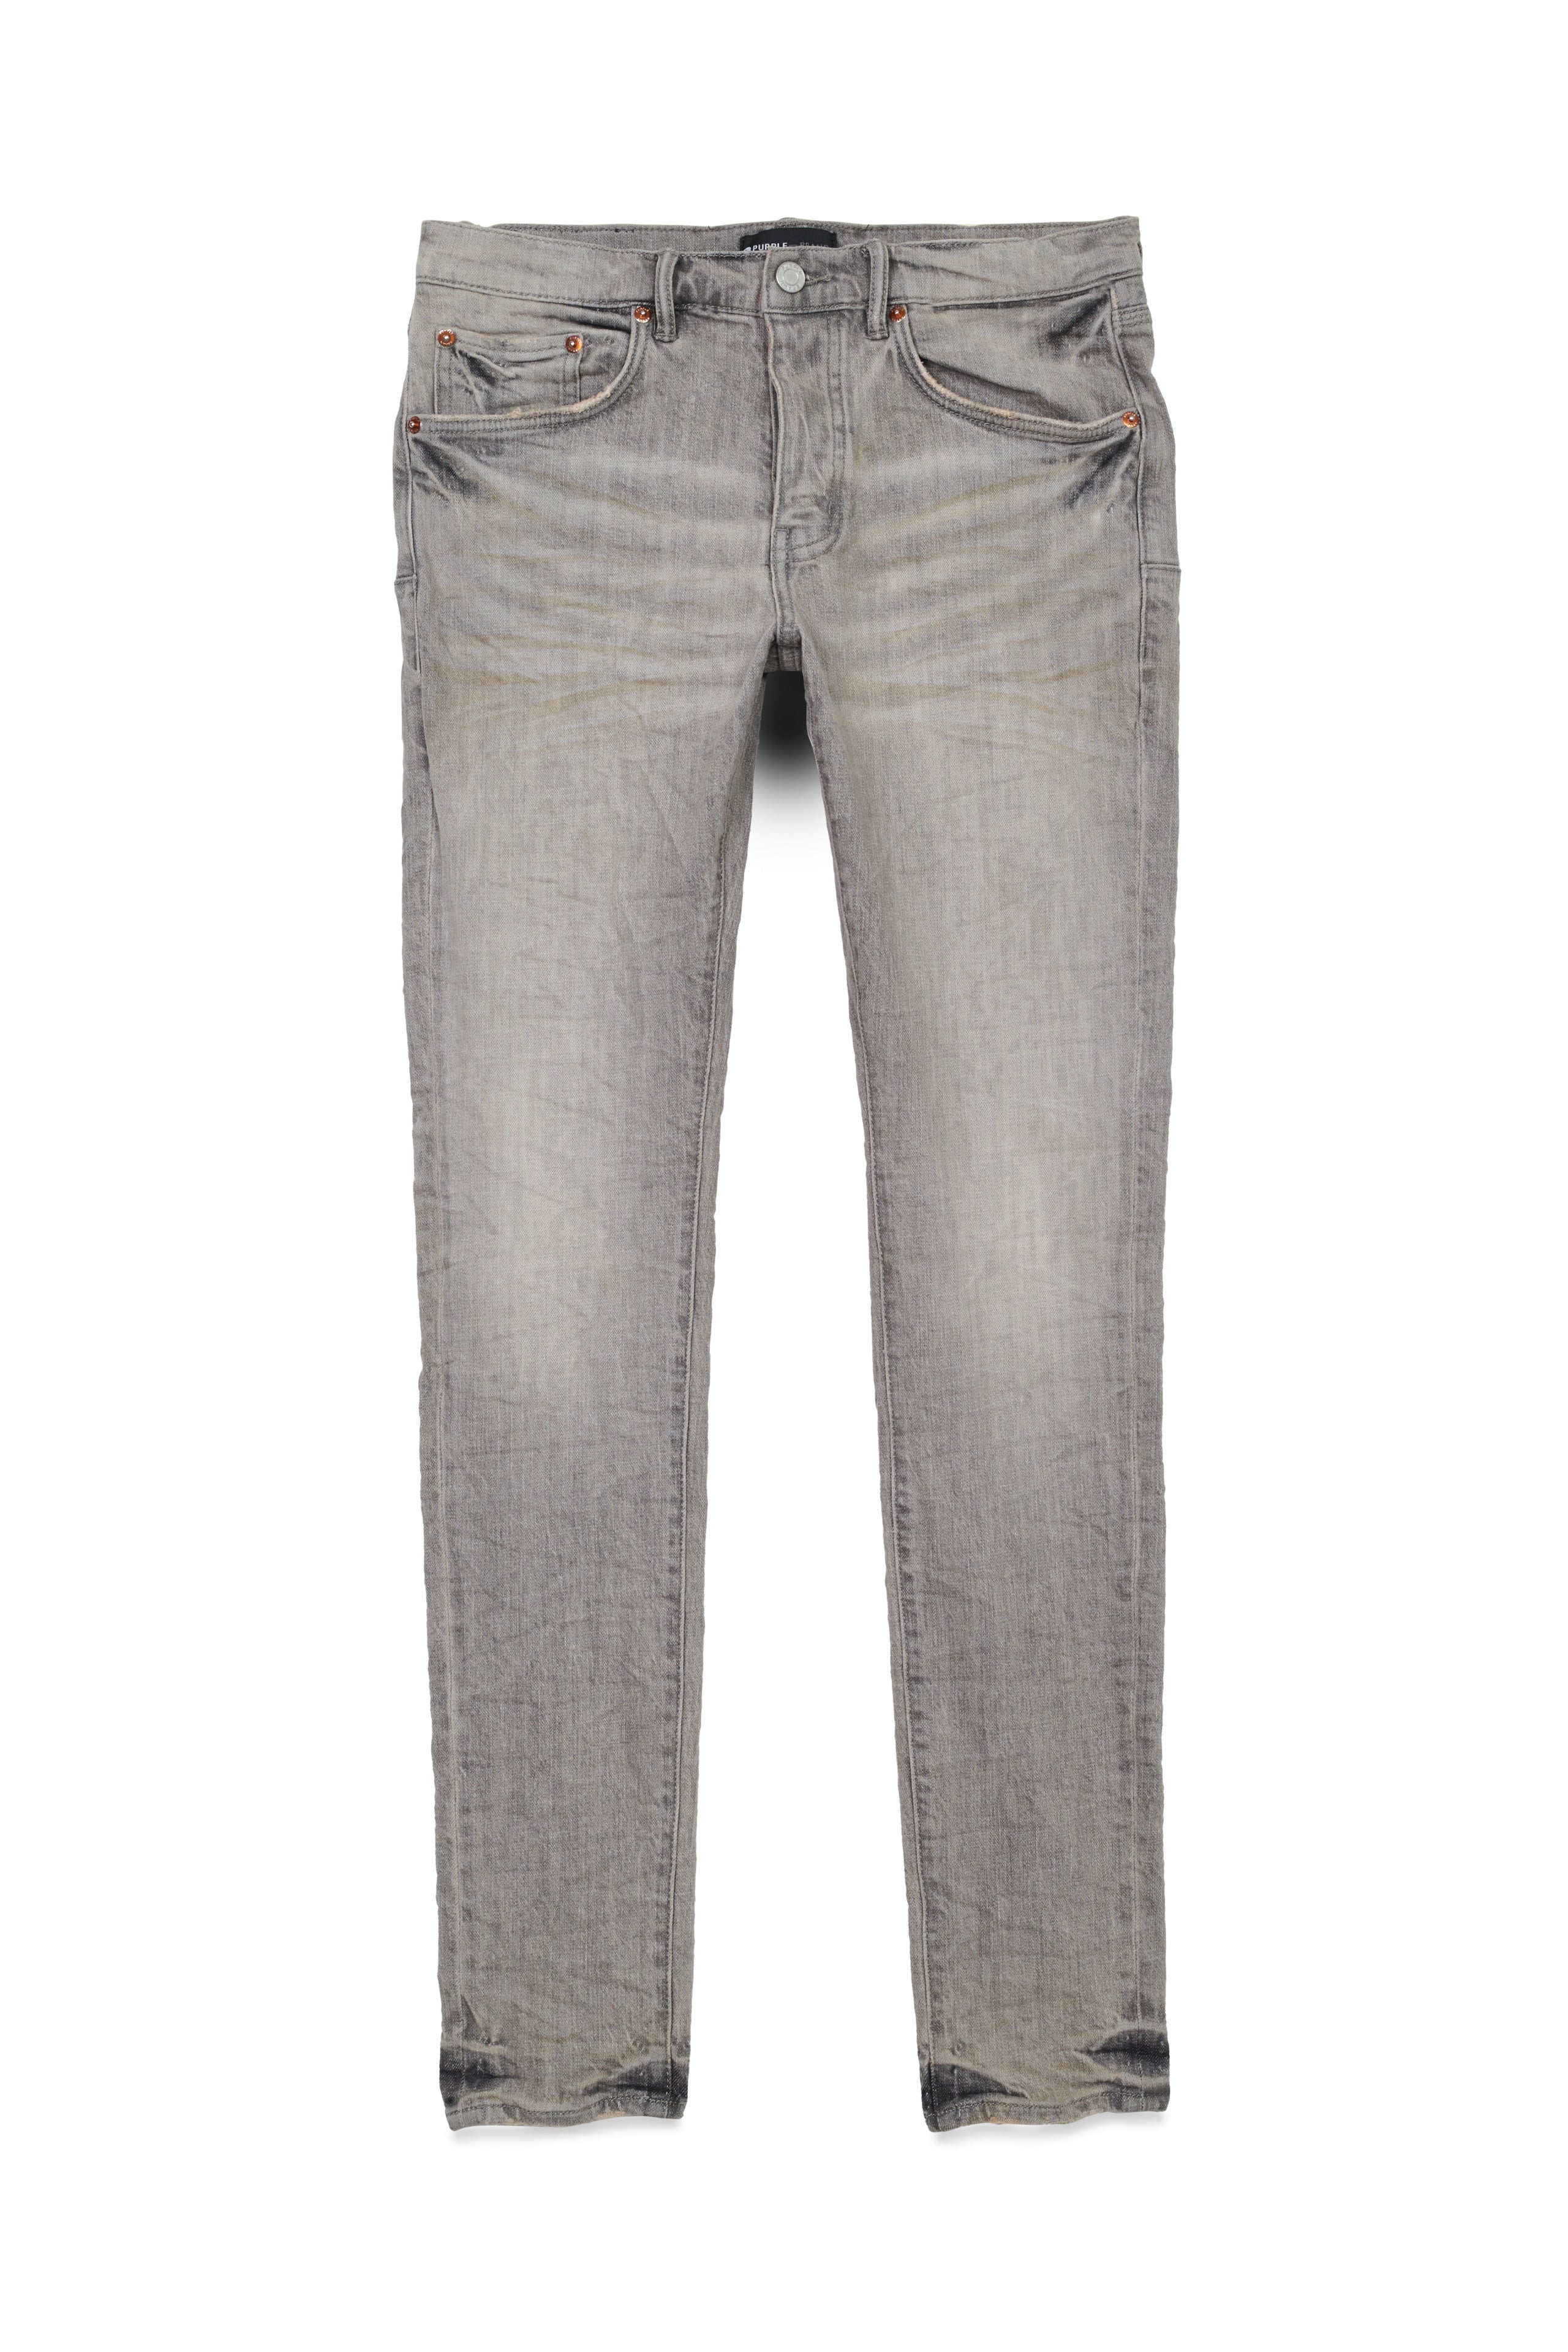 Purple brand jeans (gray)- size 32-discounted price of $100 - clothing &  accessories - by owner - apparel sale 